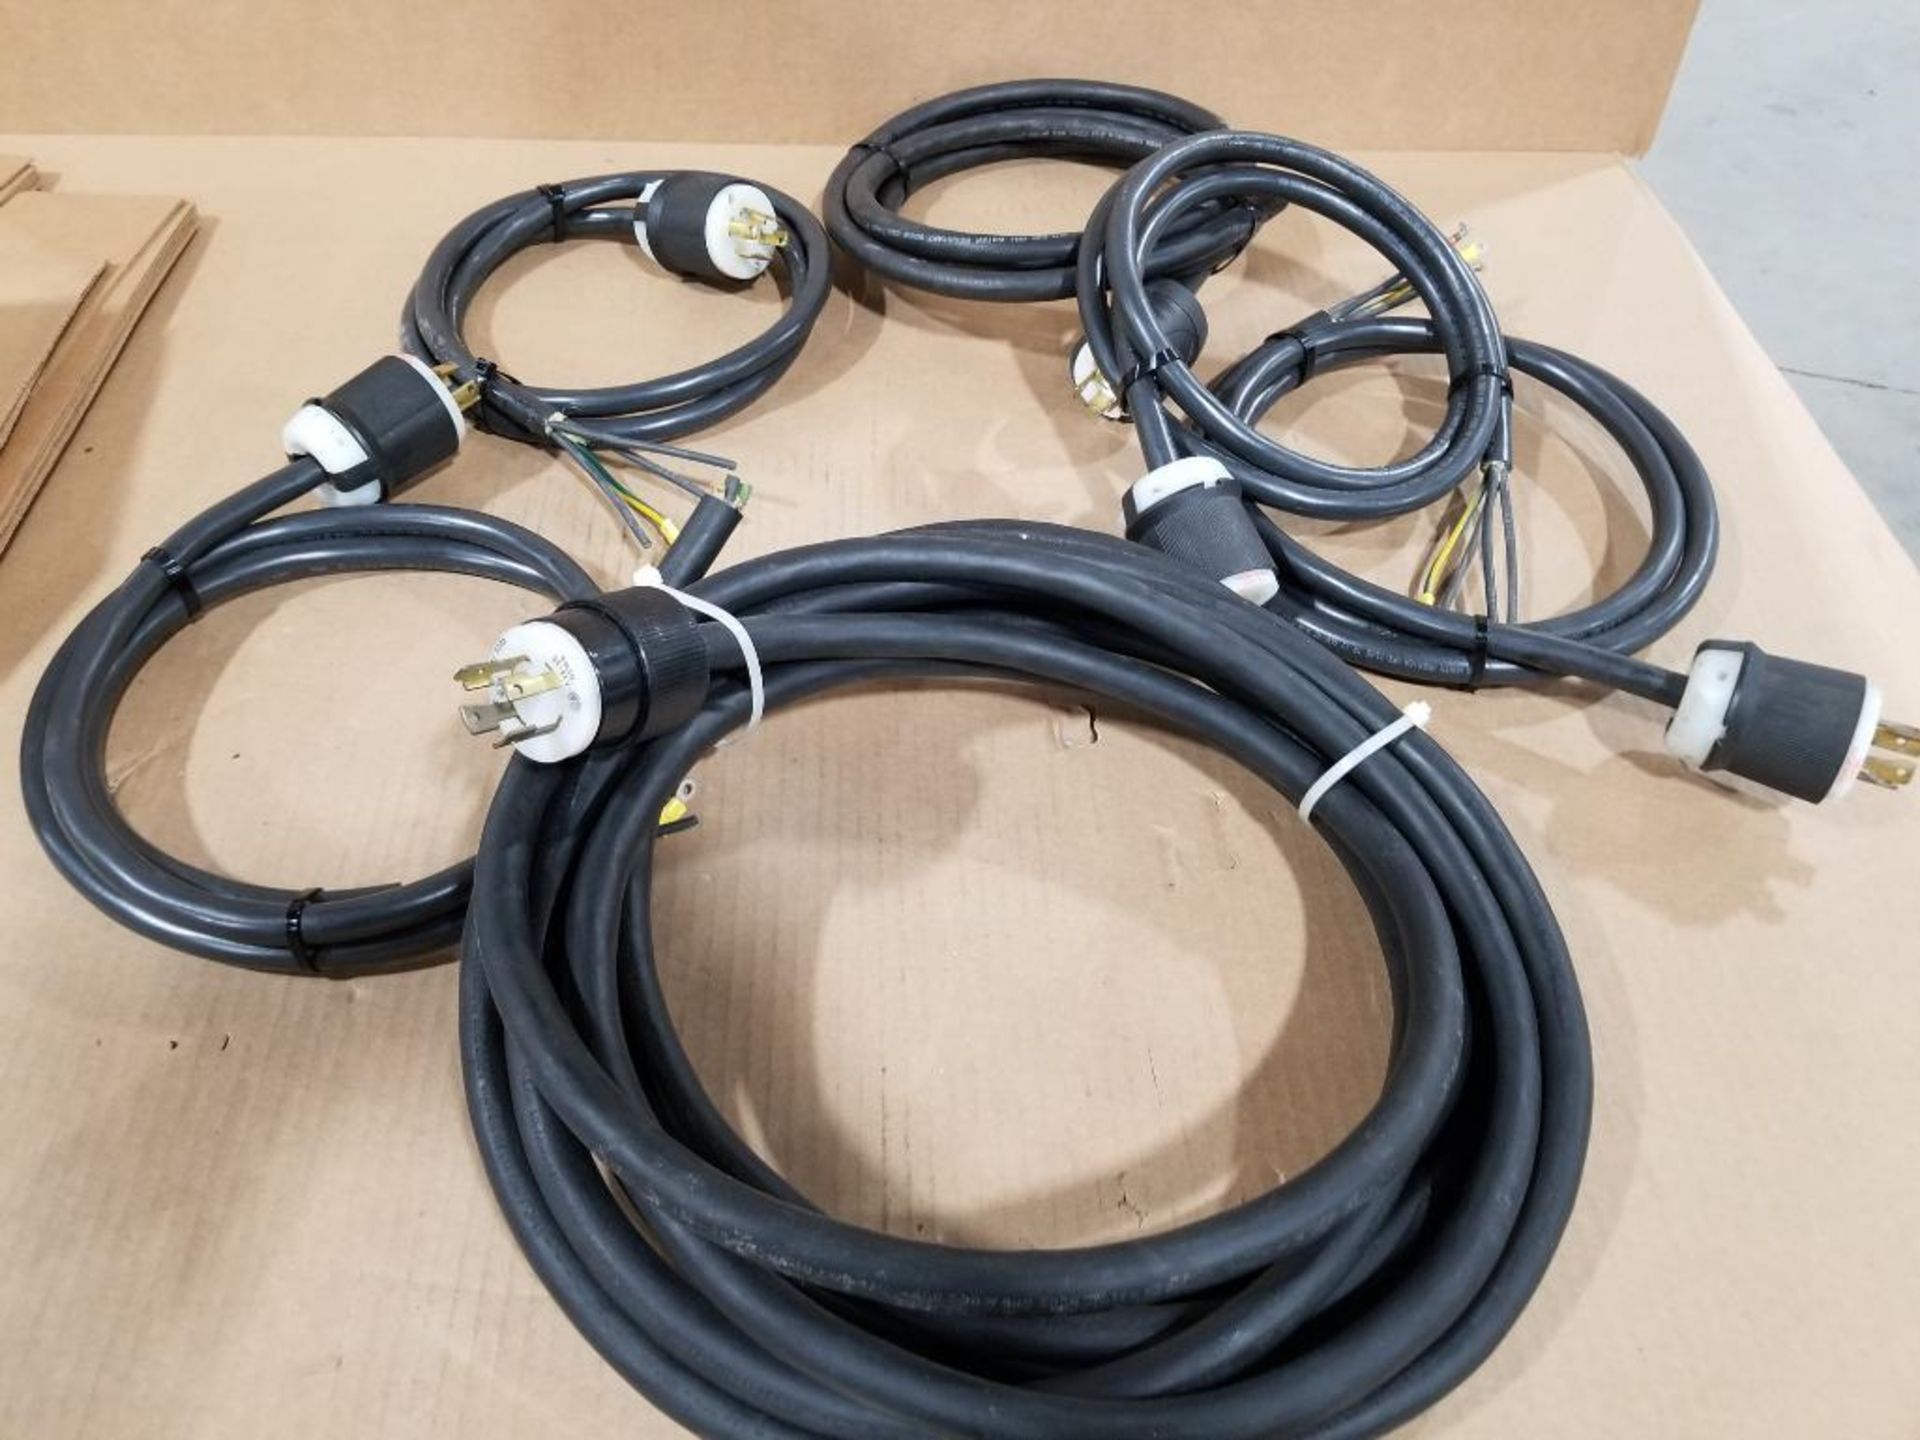 Assorted electrical cord pig tails.